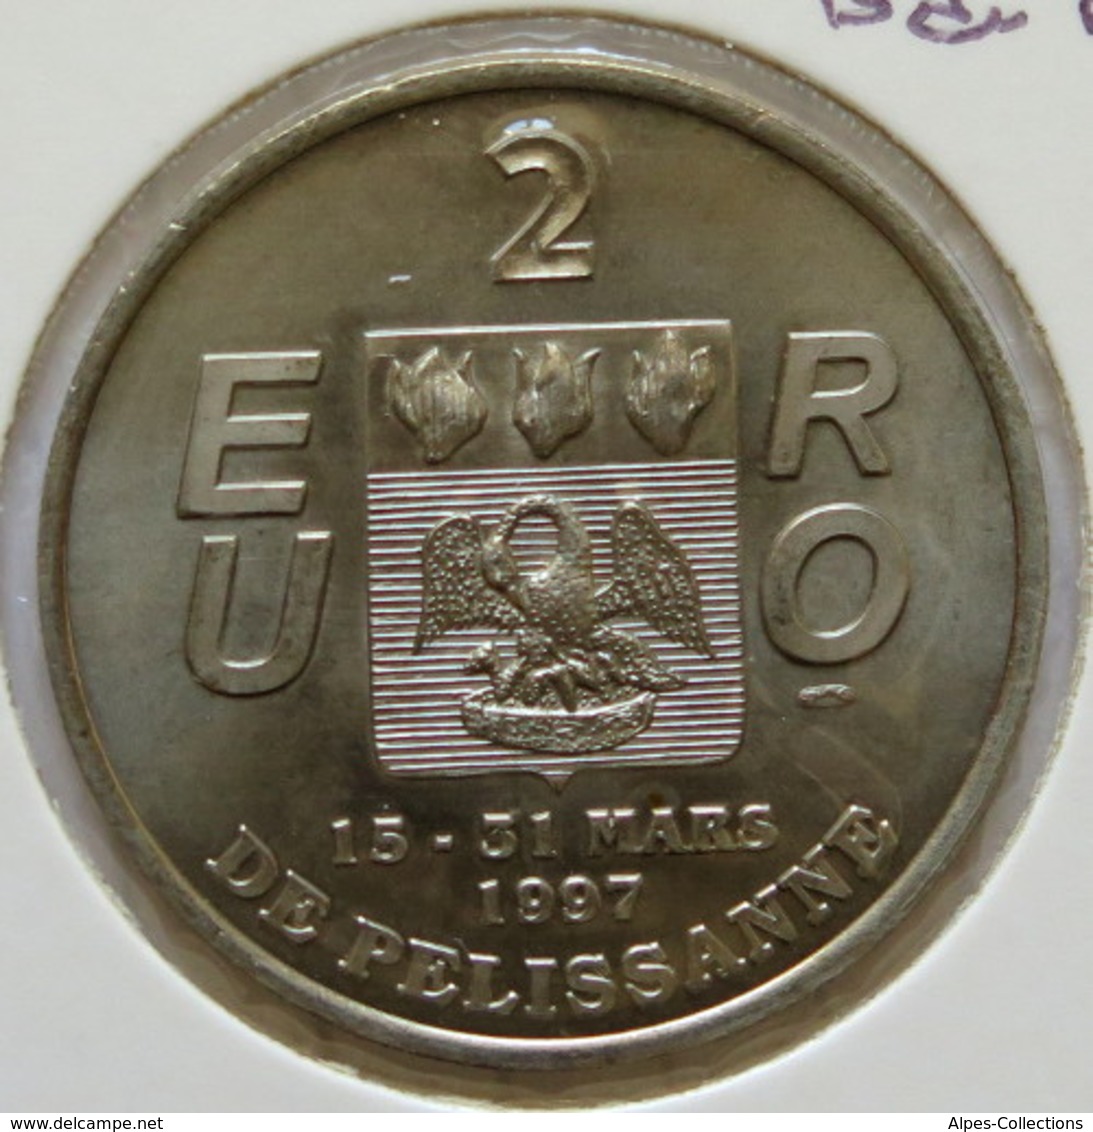 0181 - 2 EURO - PELISSANNE - 1997 - Euros Of The Cities